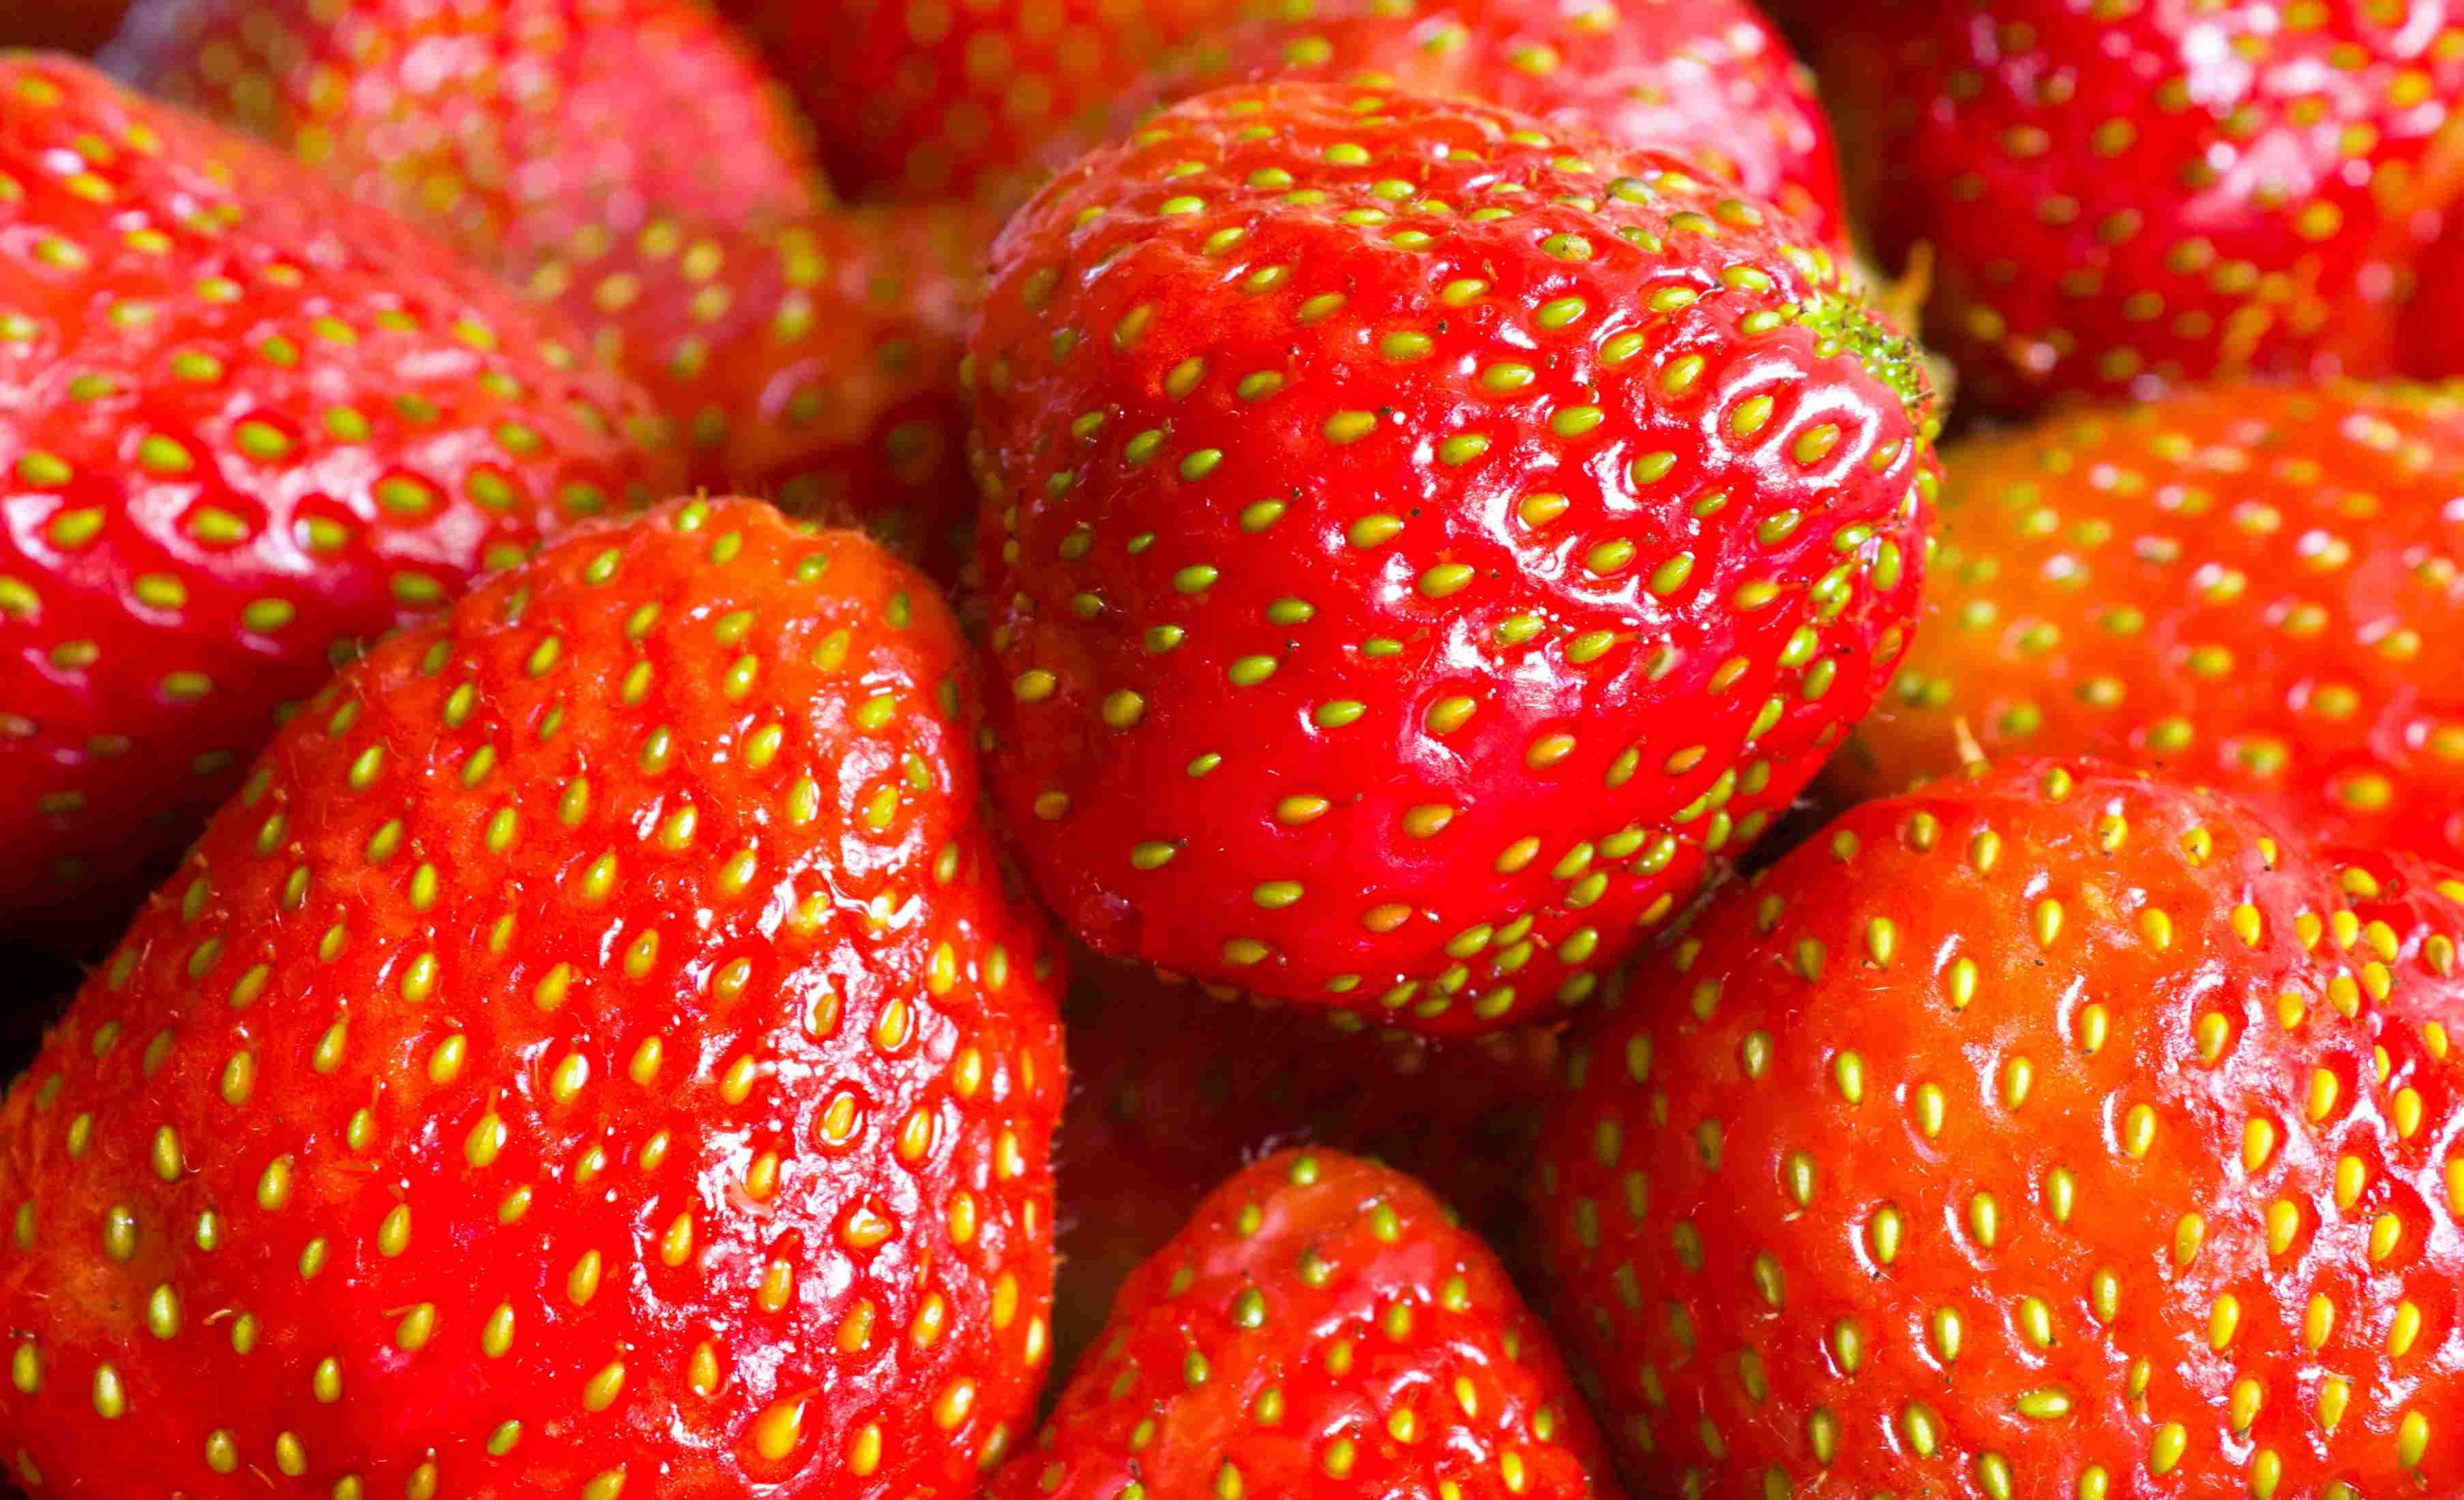 Why Strawberry Seeds Are On The Outside